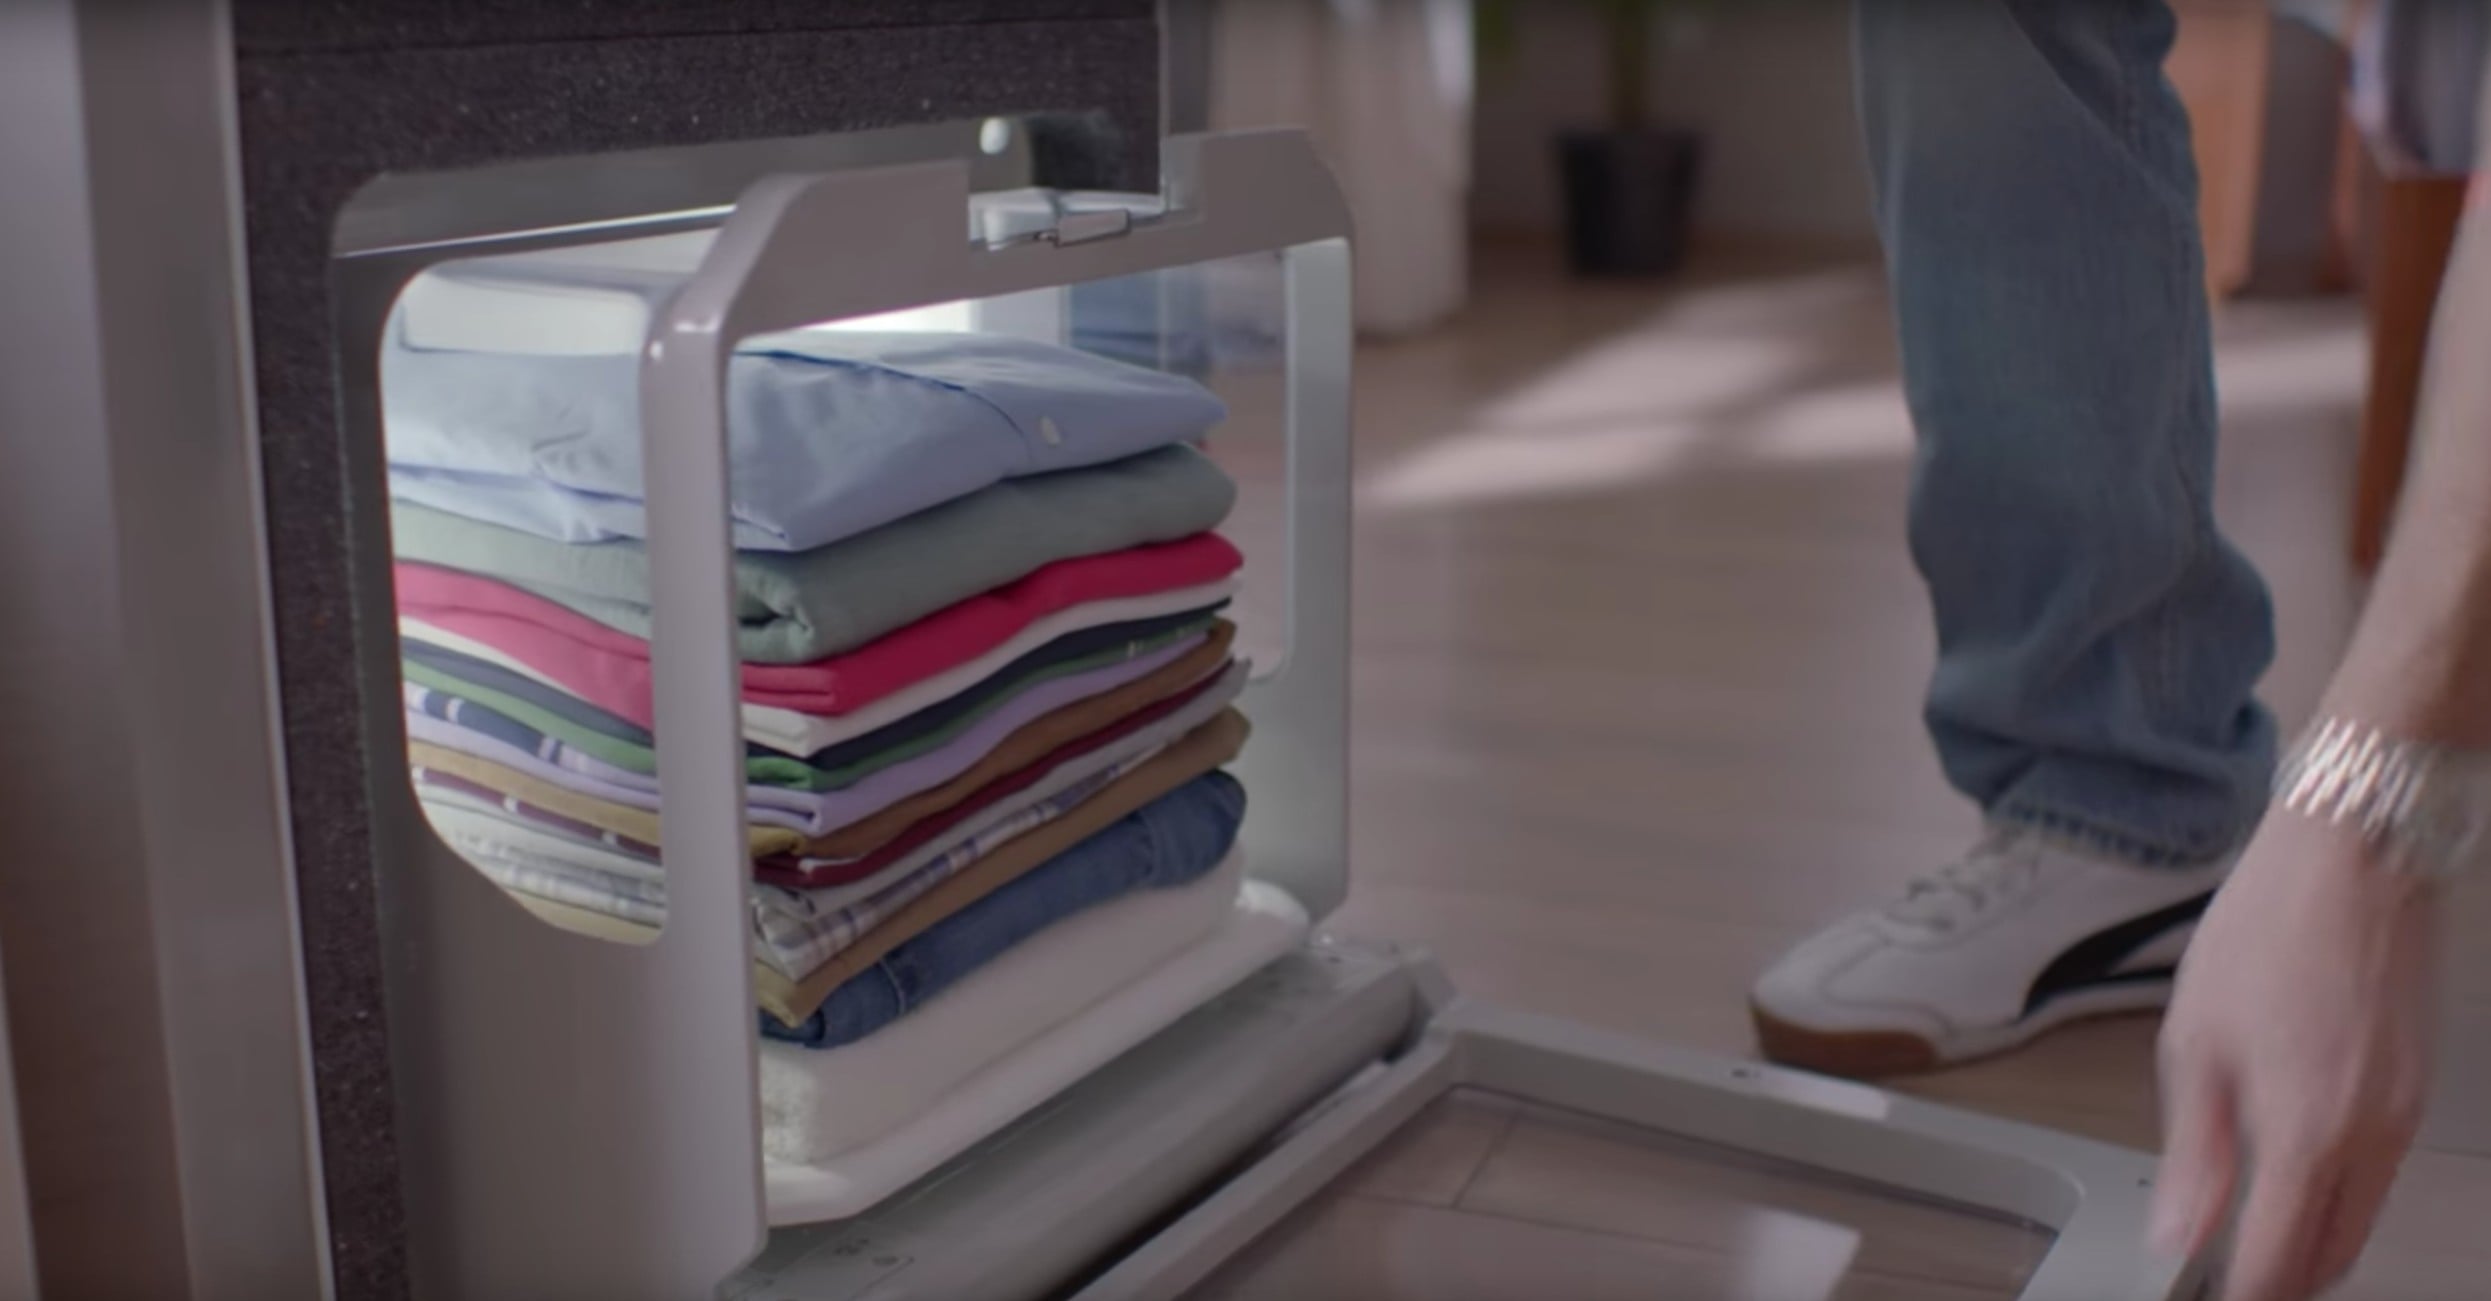 Hate folding laundry? FoldiMate offers a solution - ISRAEL21c